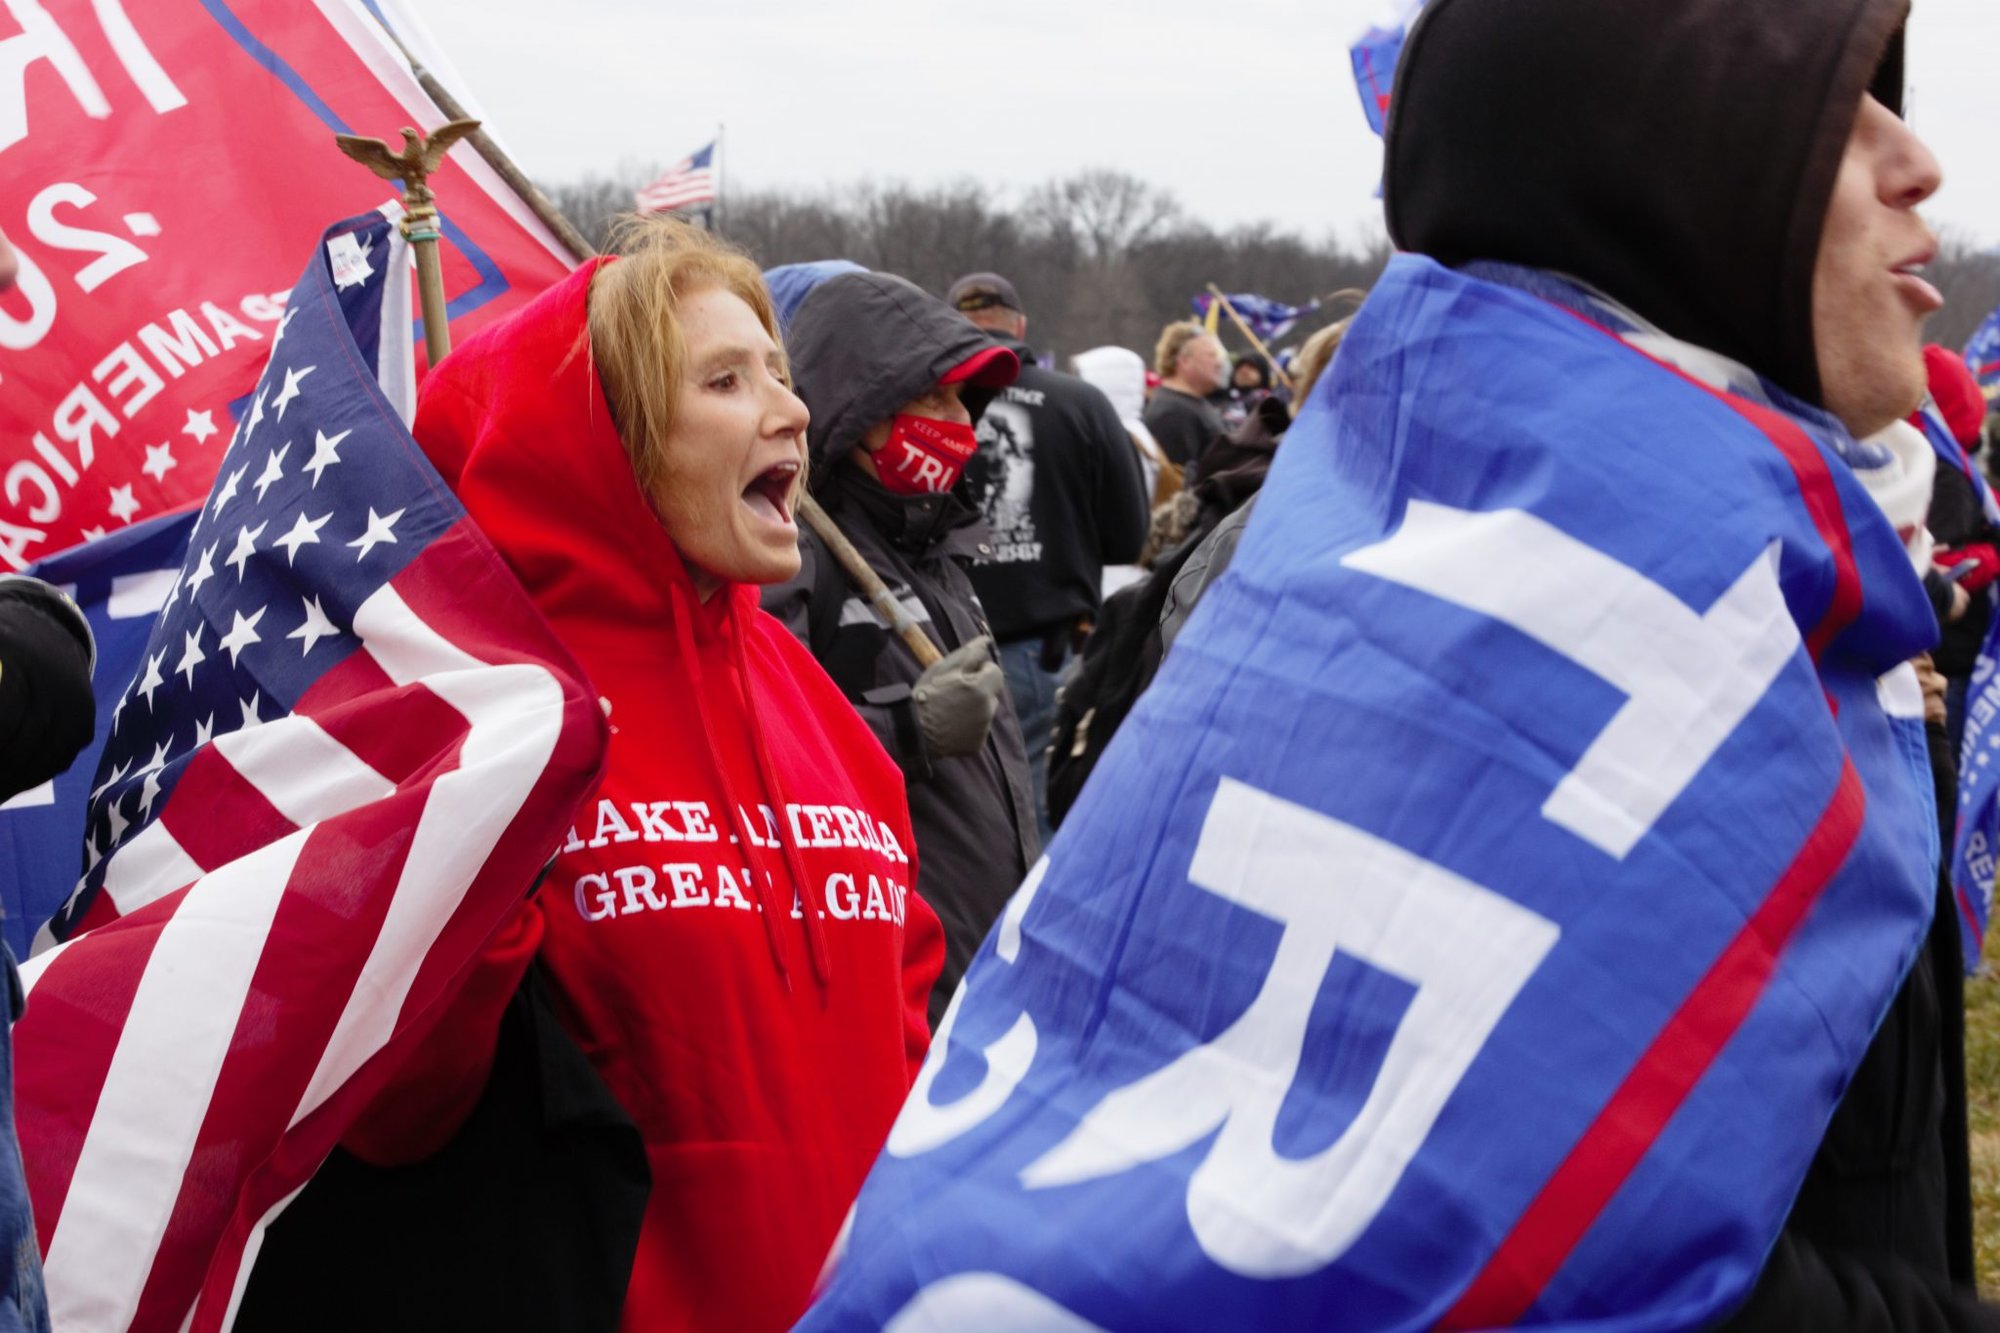 Supporters of President Donald Trump demonstrate at the “Stop the Steal” rally in Washington, D.C. Jan. 6. Photo by Joseph Andrew Lee/Coffee or Die Magazine.